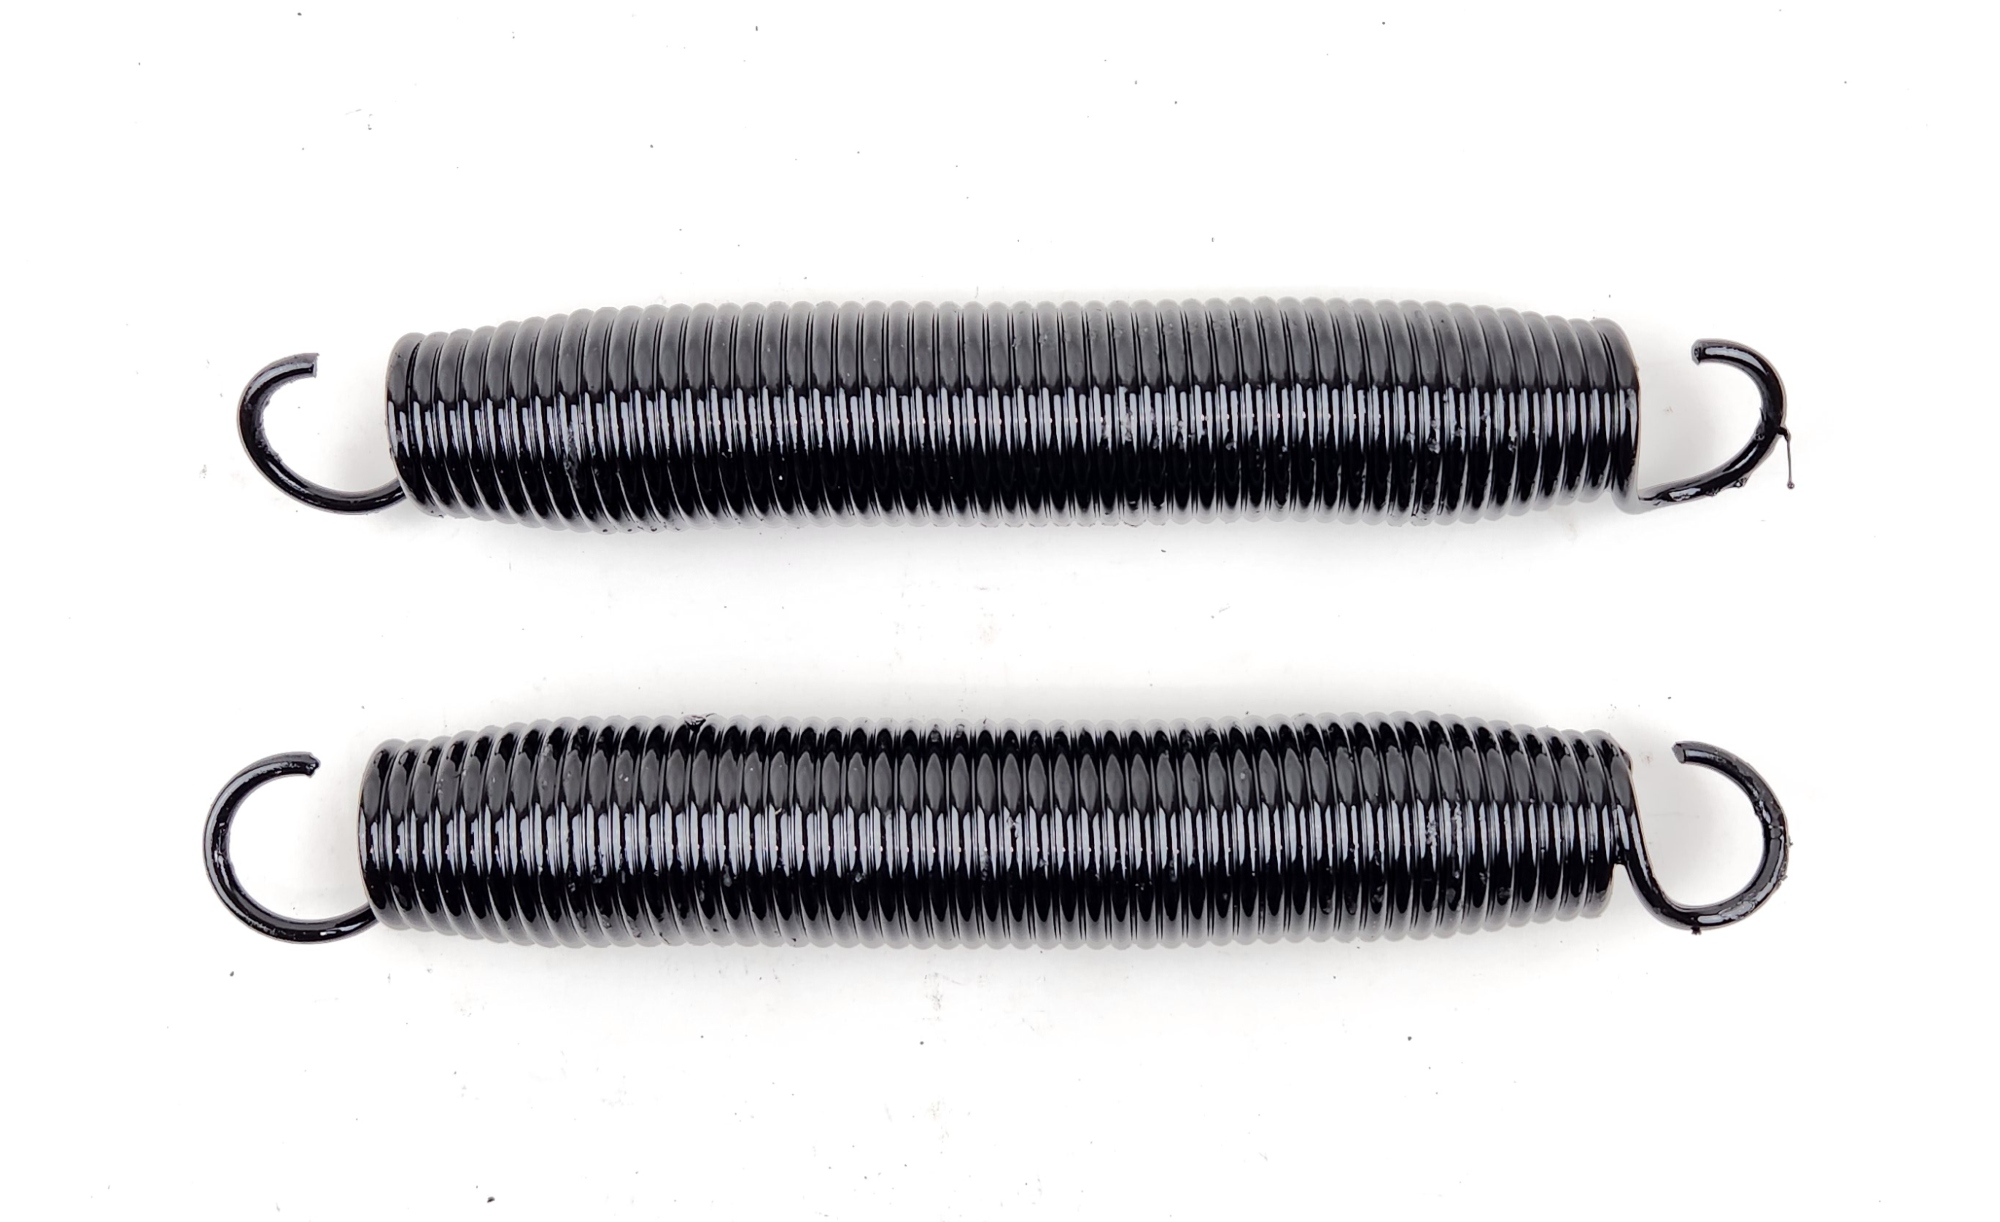 HWH R6824 Replacement Spring Kit for Hydraulic Leveling Jacks (2 Springs)